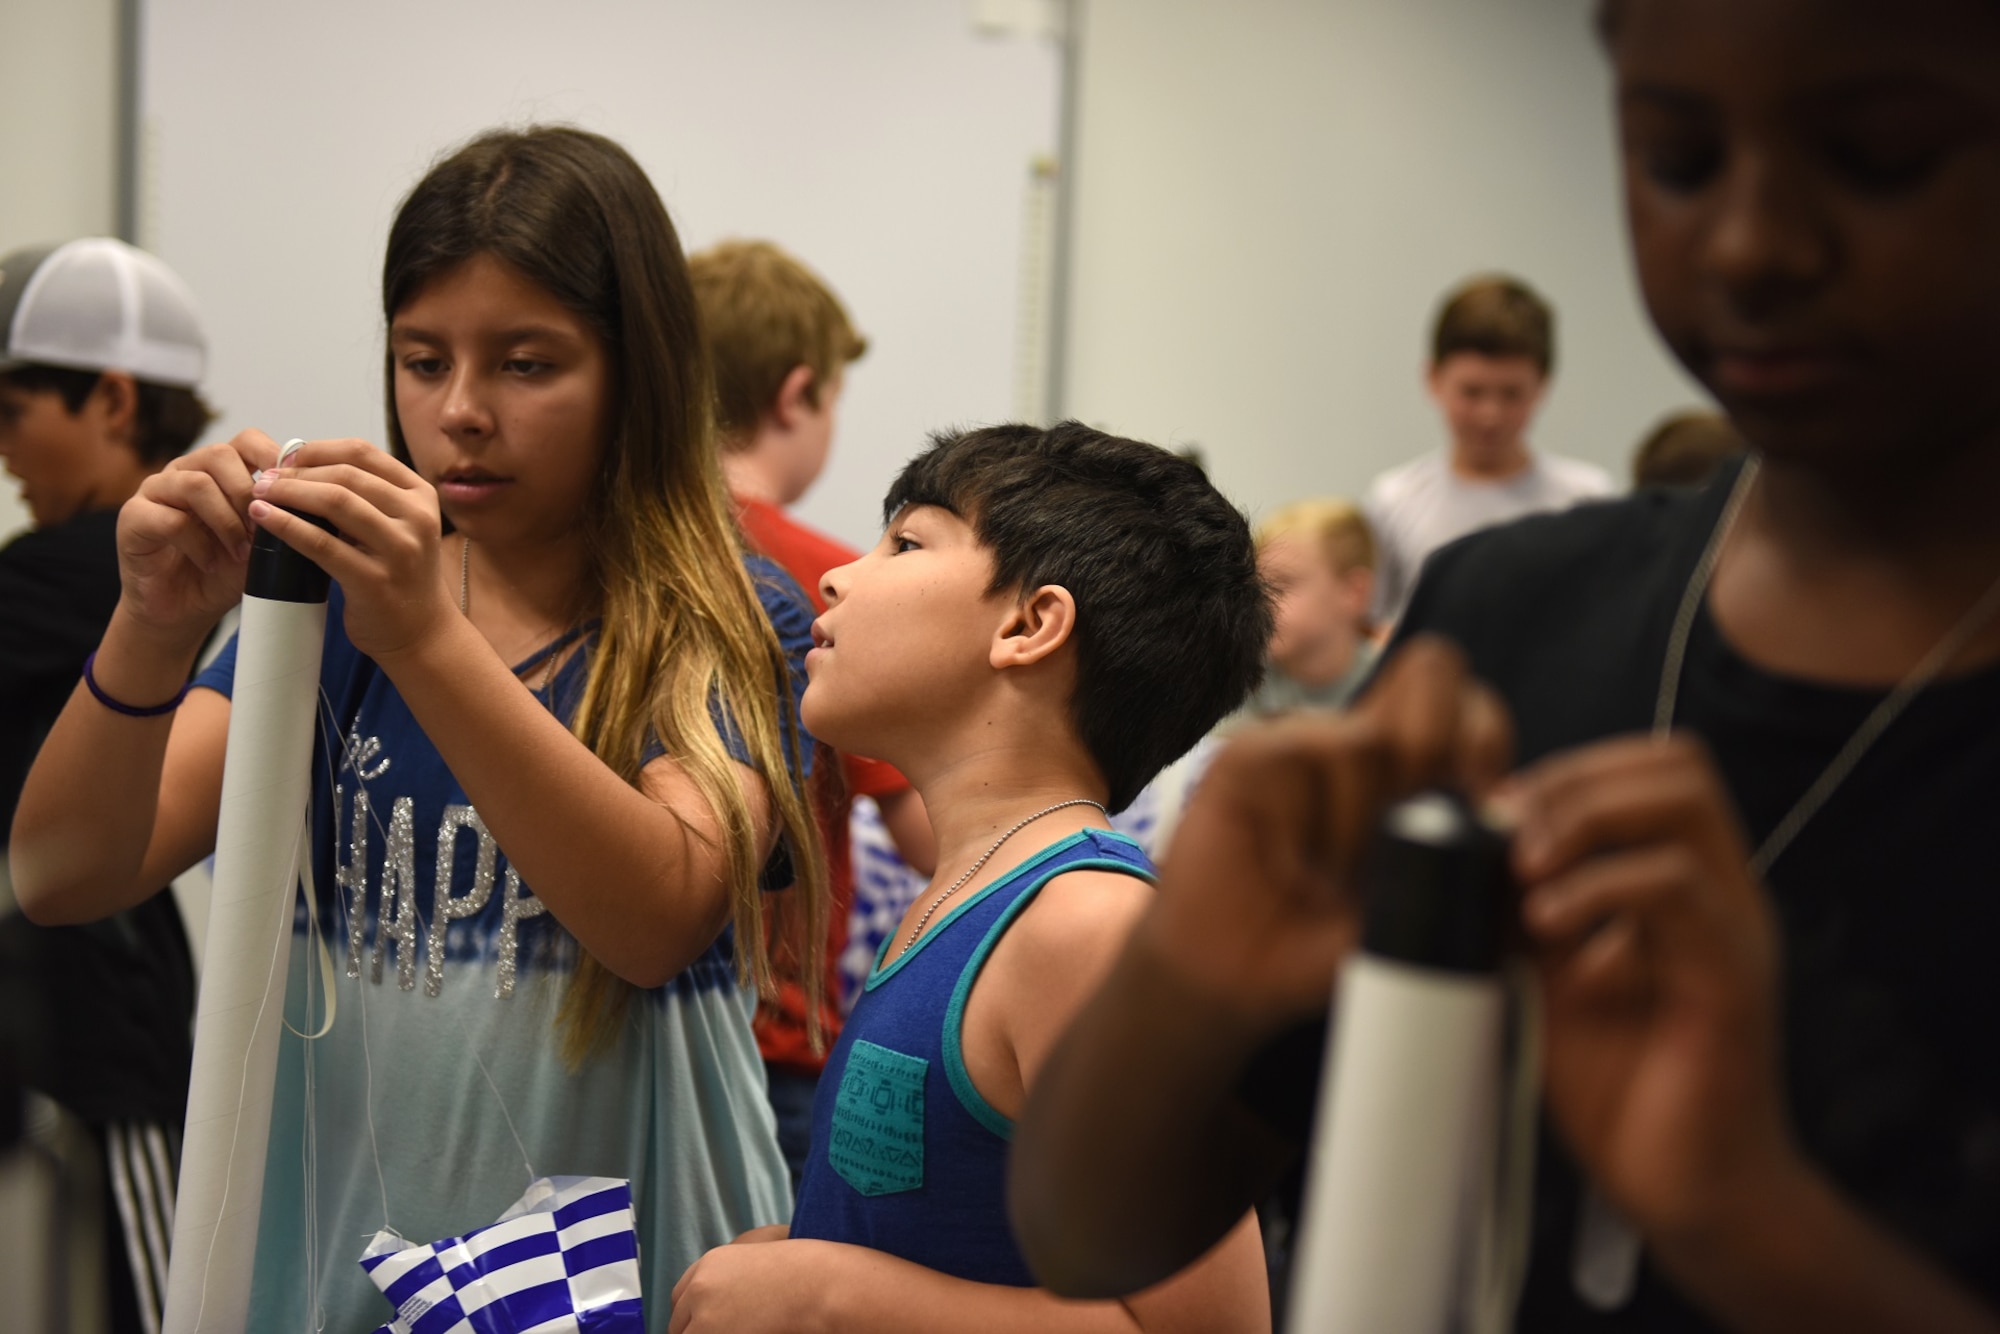 Valentina Olaya (left), helps Josue Samudil (right), son of U.S. Air Force Staff Sgt. Brittany Coleman, military pay technician with the 145th Comptroller Flight, with building his model rocket during a lesson held at the North Carolina Air National Guard Base, Charlotte-Douglas International Airport, June 18, 2018. The children are part of the annual Department of Defense STARBASE summer camp program and learn various applications of science, technology, engineering, and math.